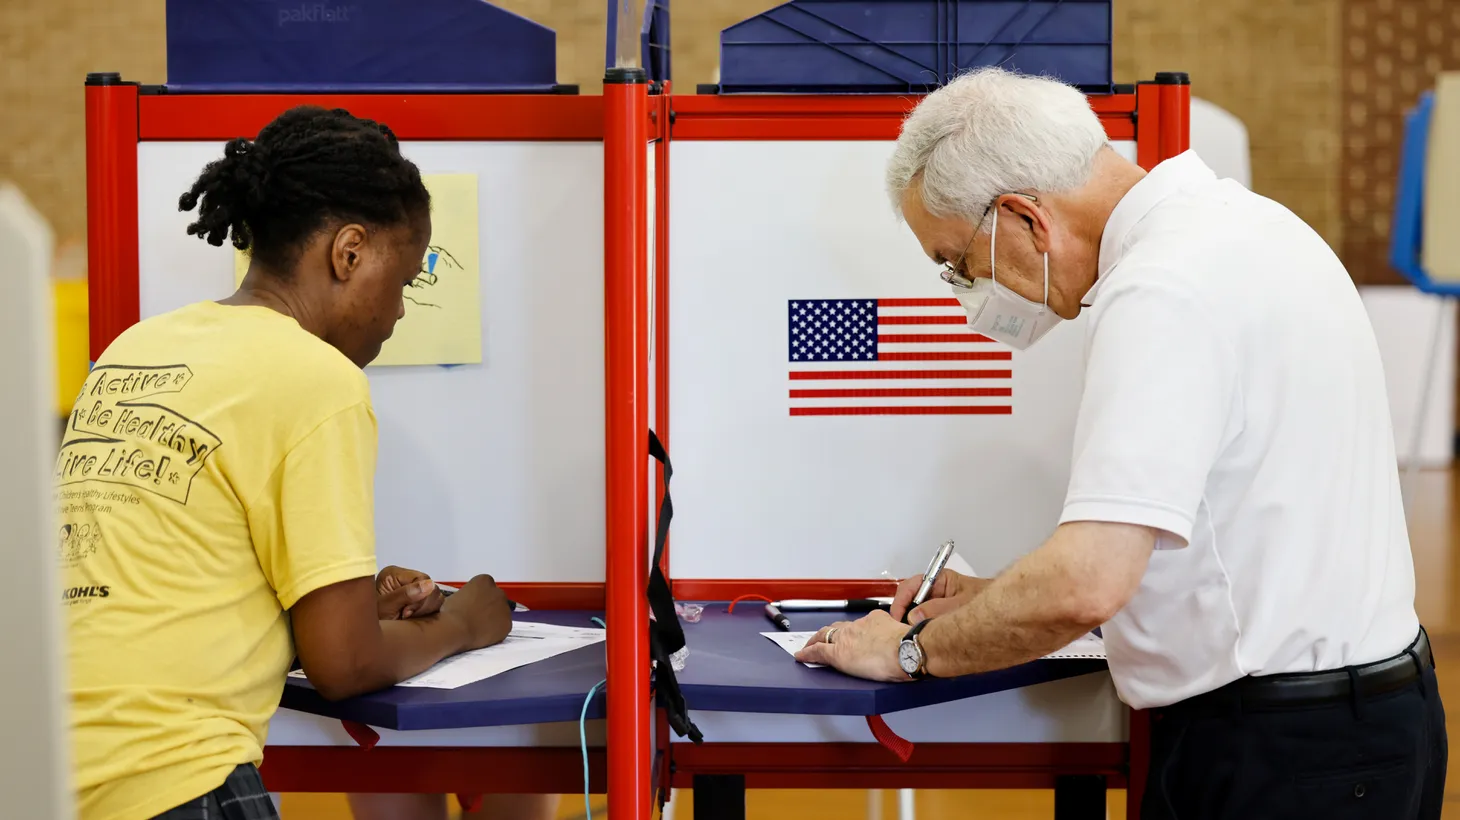 A woman and a man mark their ballots at a voting site during primary elections in Chapel Hill, North Carolina, U.S., May 17, 2022.